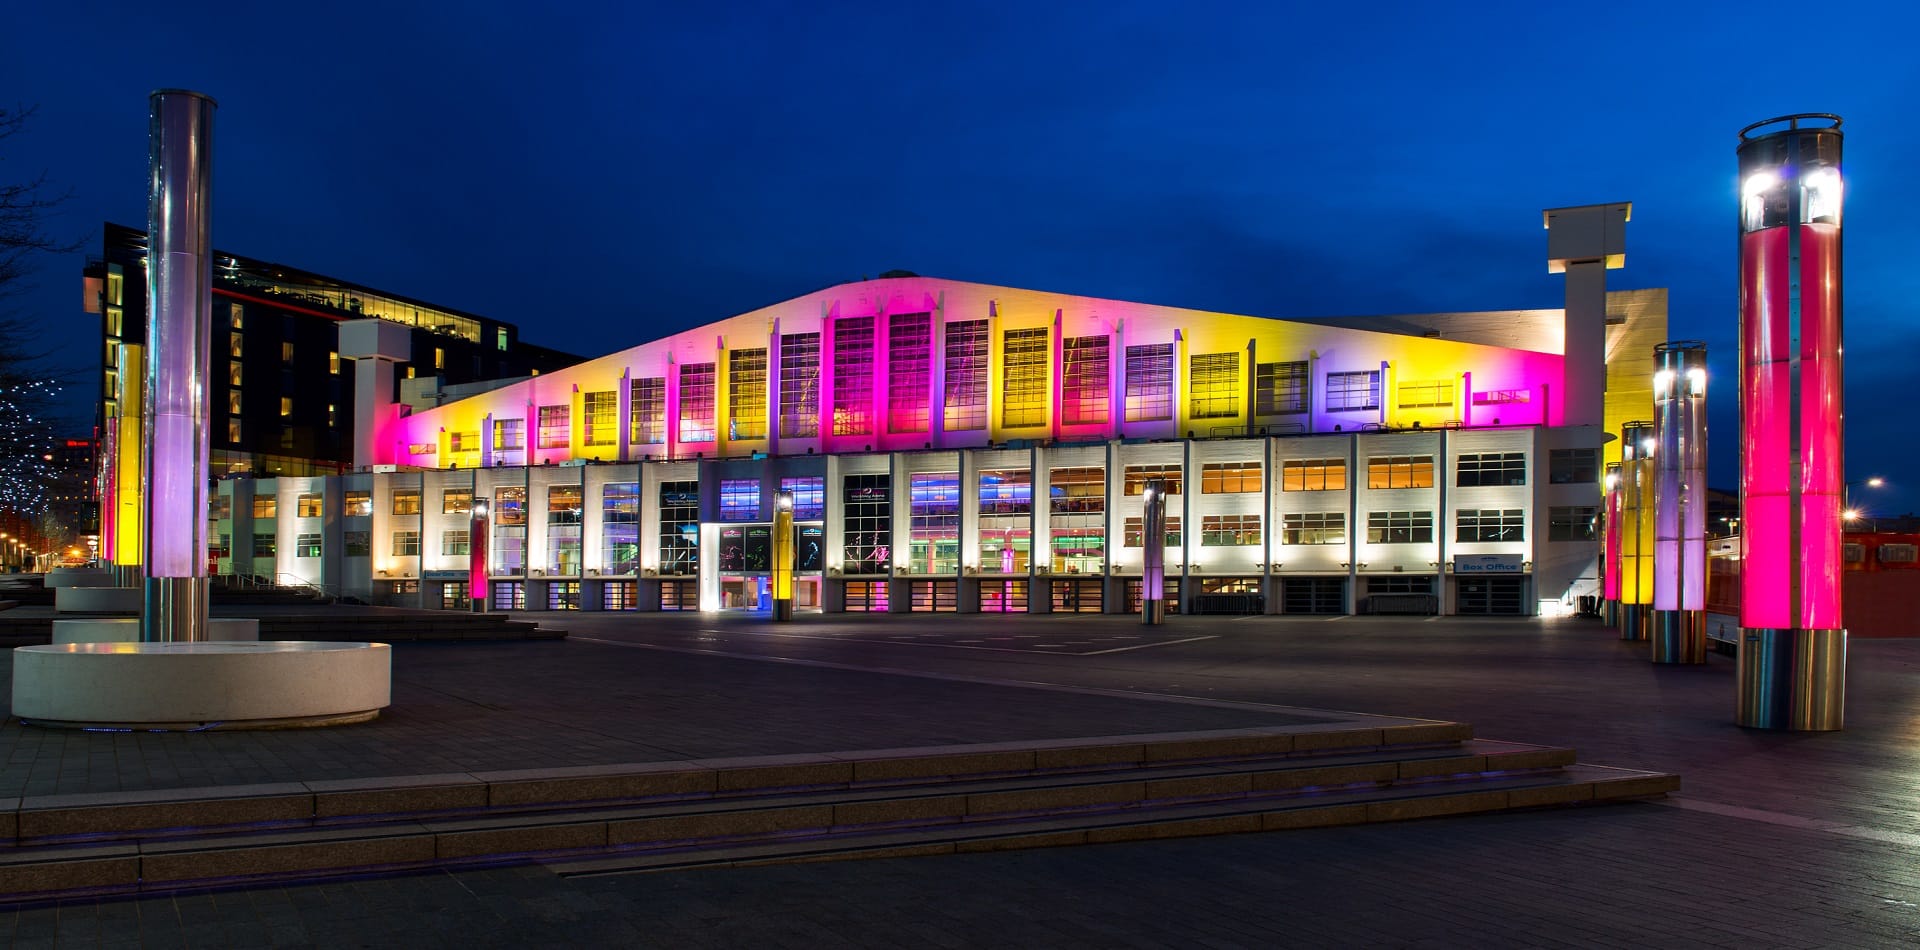 Wembley Arena in London, England